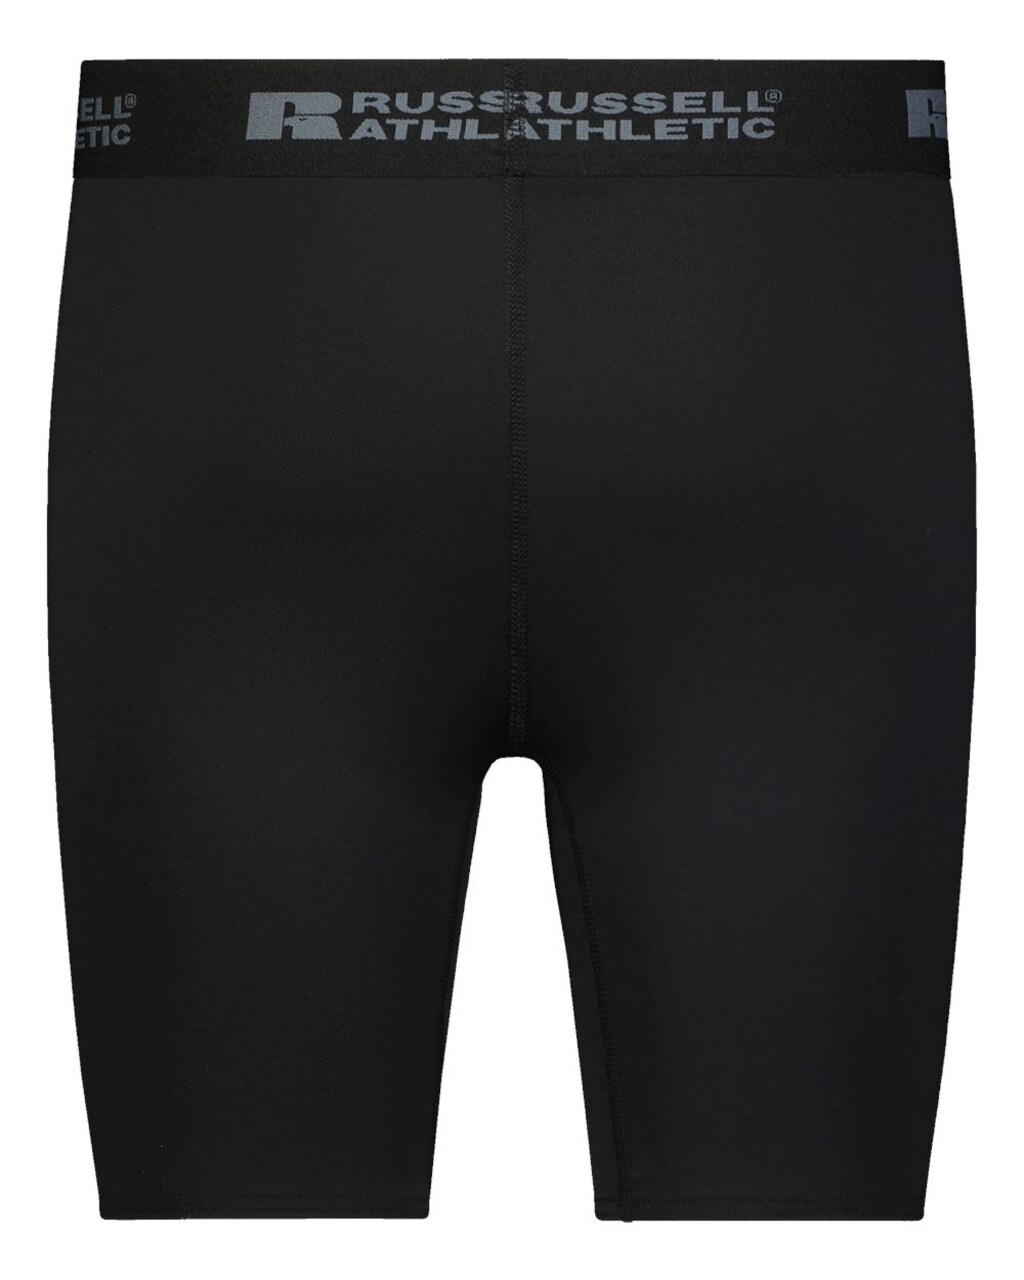 Russell Athletic&#xAE; - CoolCore Compression Shorts | 84/16 polyester/spandex elastane Xtreme compression cloth - R24CPM | Unleash Your Style with Our Trendy Athletic shorts